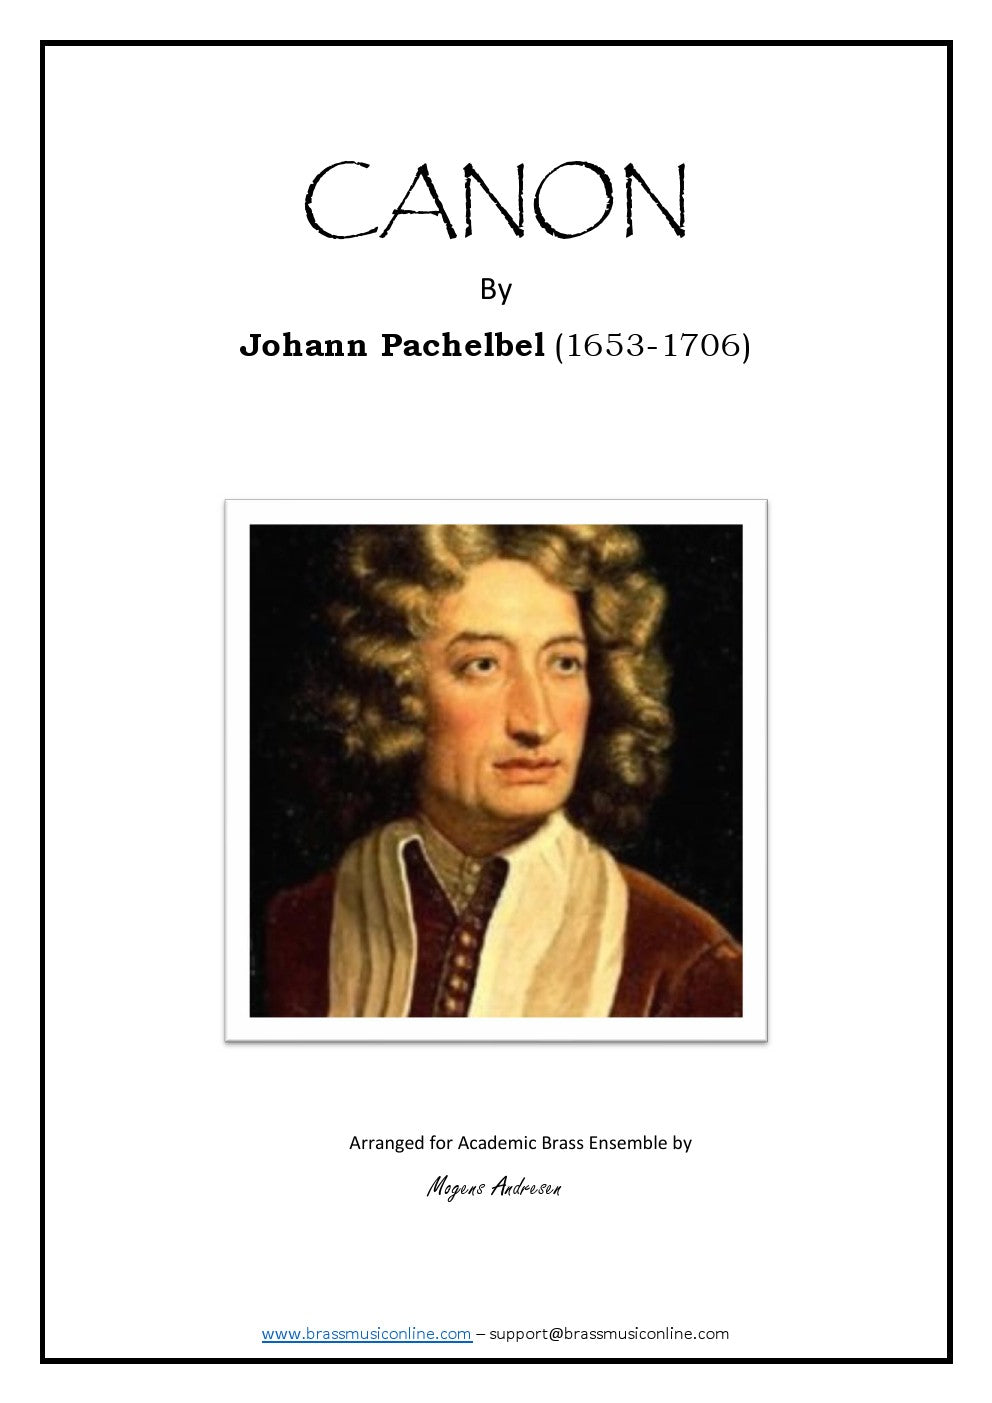 Pachelbel Canon - 30 or 60 Minute Versions for Sound Table - Physical CD -  Sound Healing Instruments, Technologies, Music & Videos